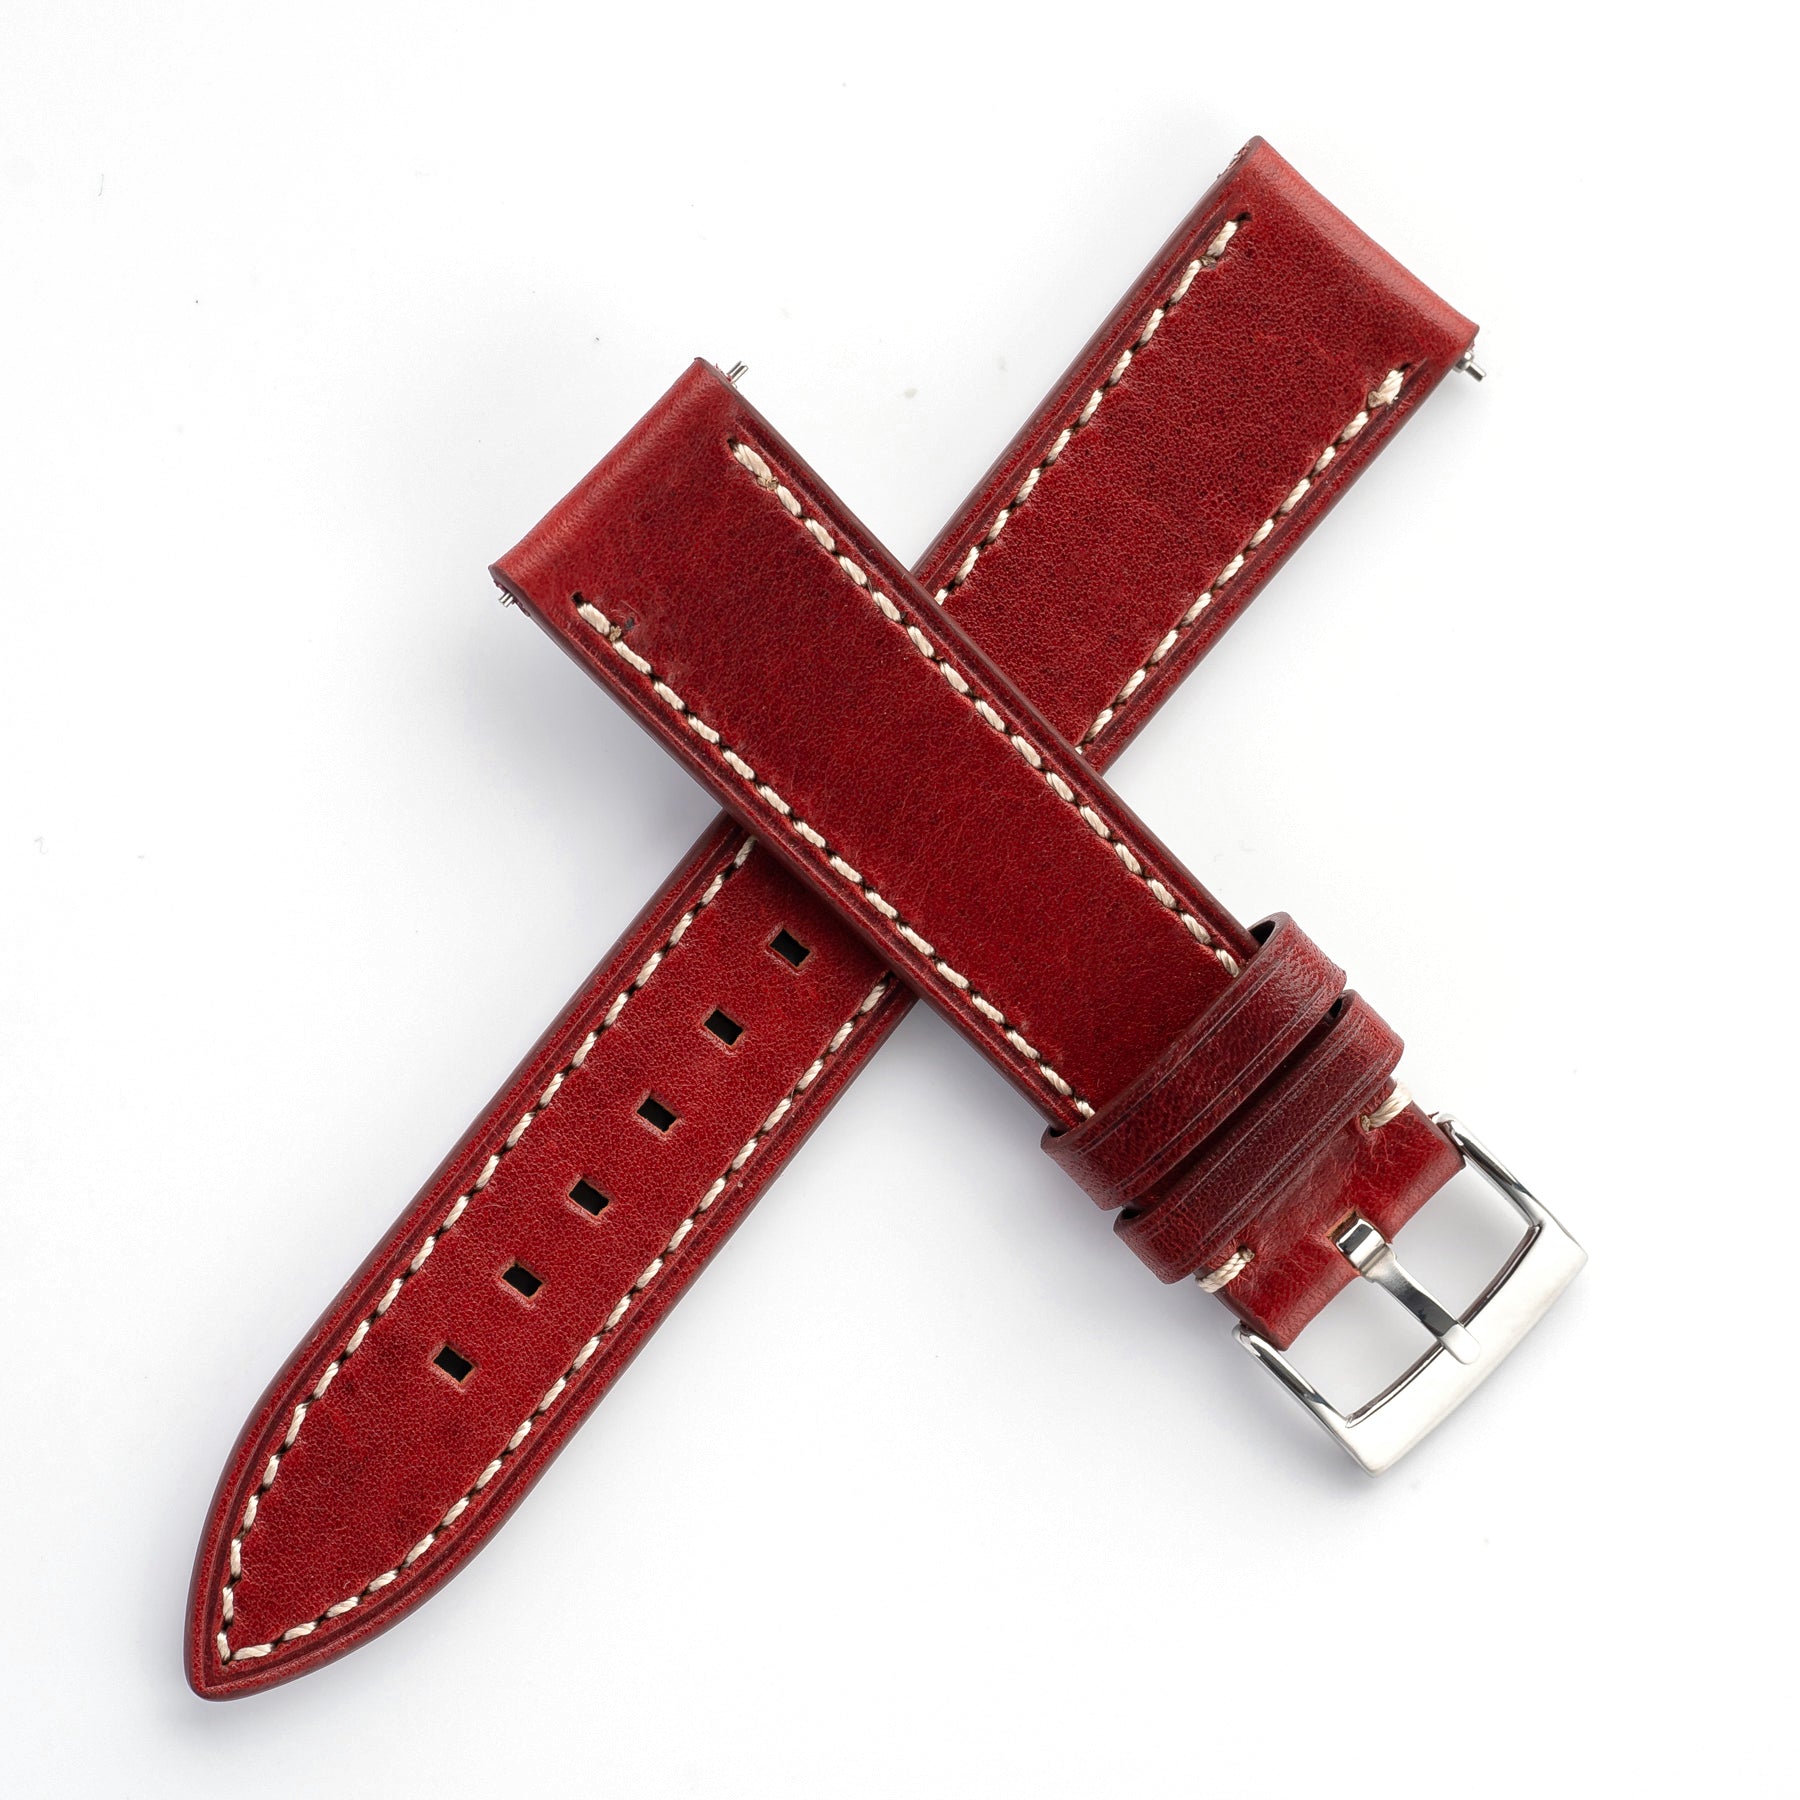 20mm 22mm Quick Release Handmade Leather Watch Strap - Oxblood Red Ful ...